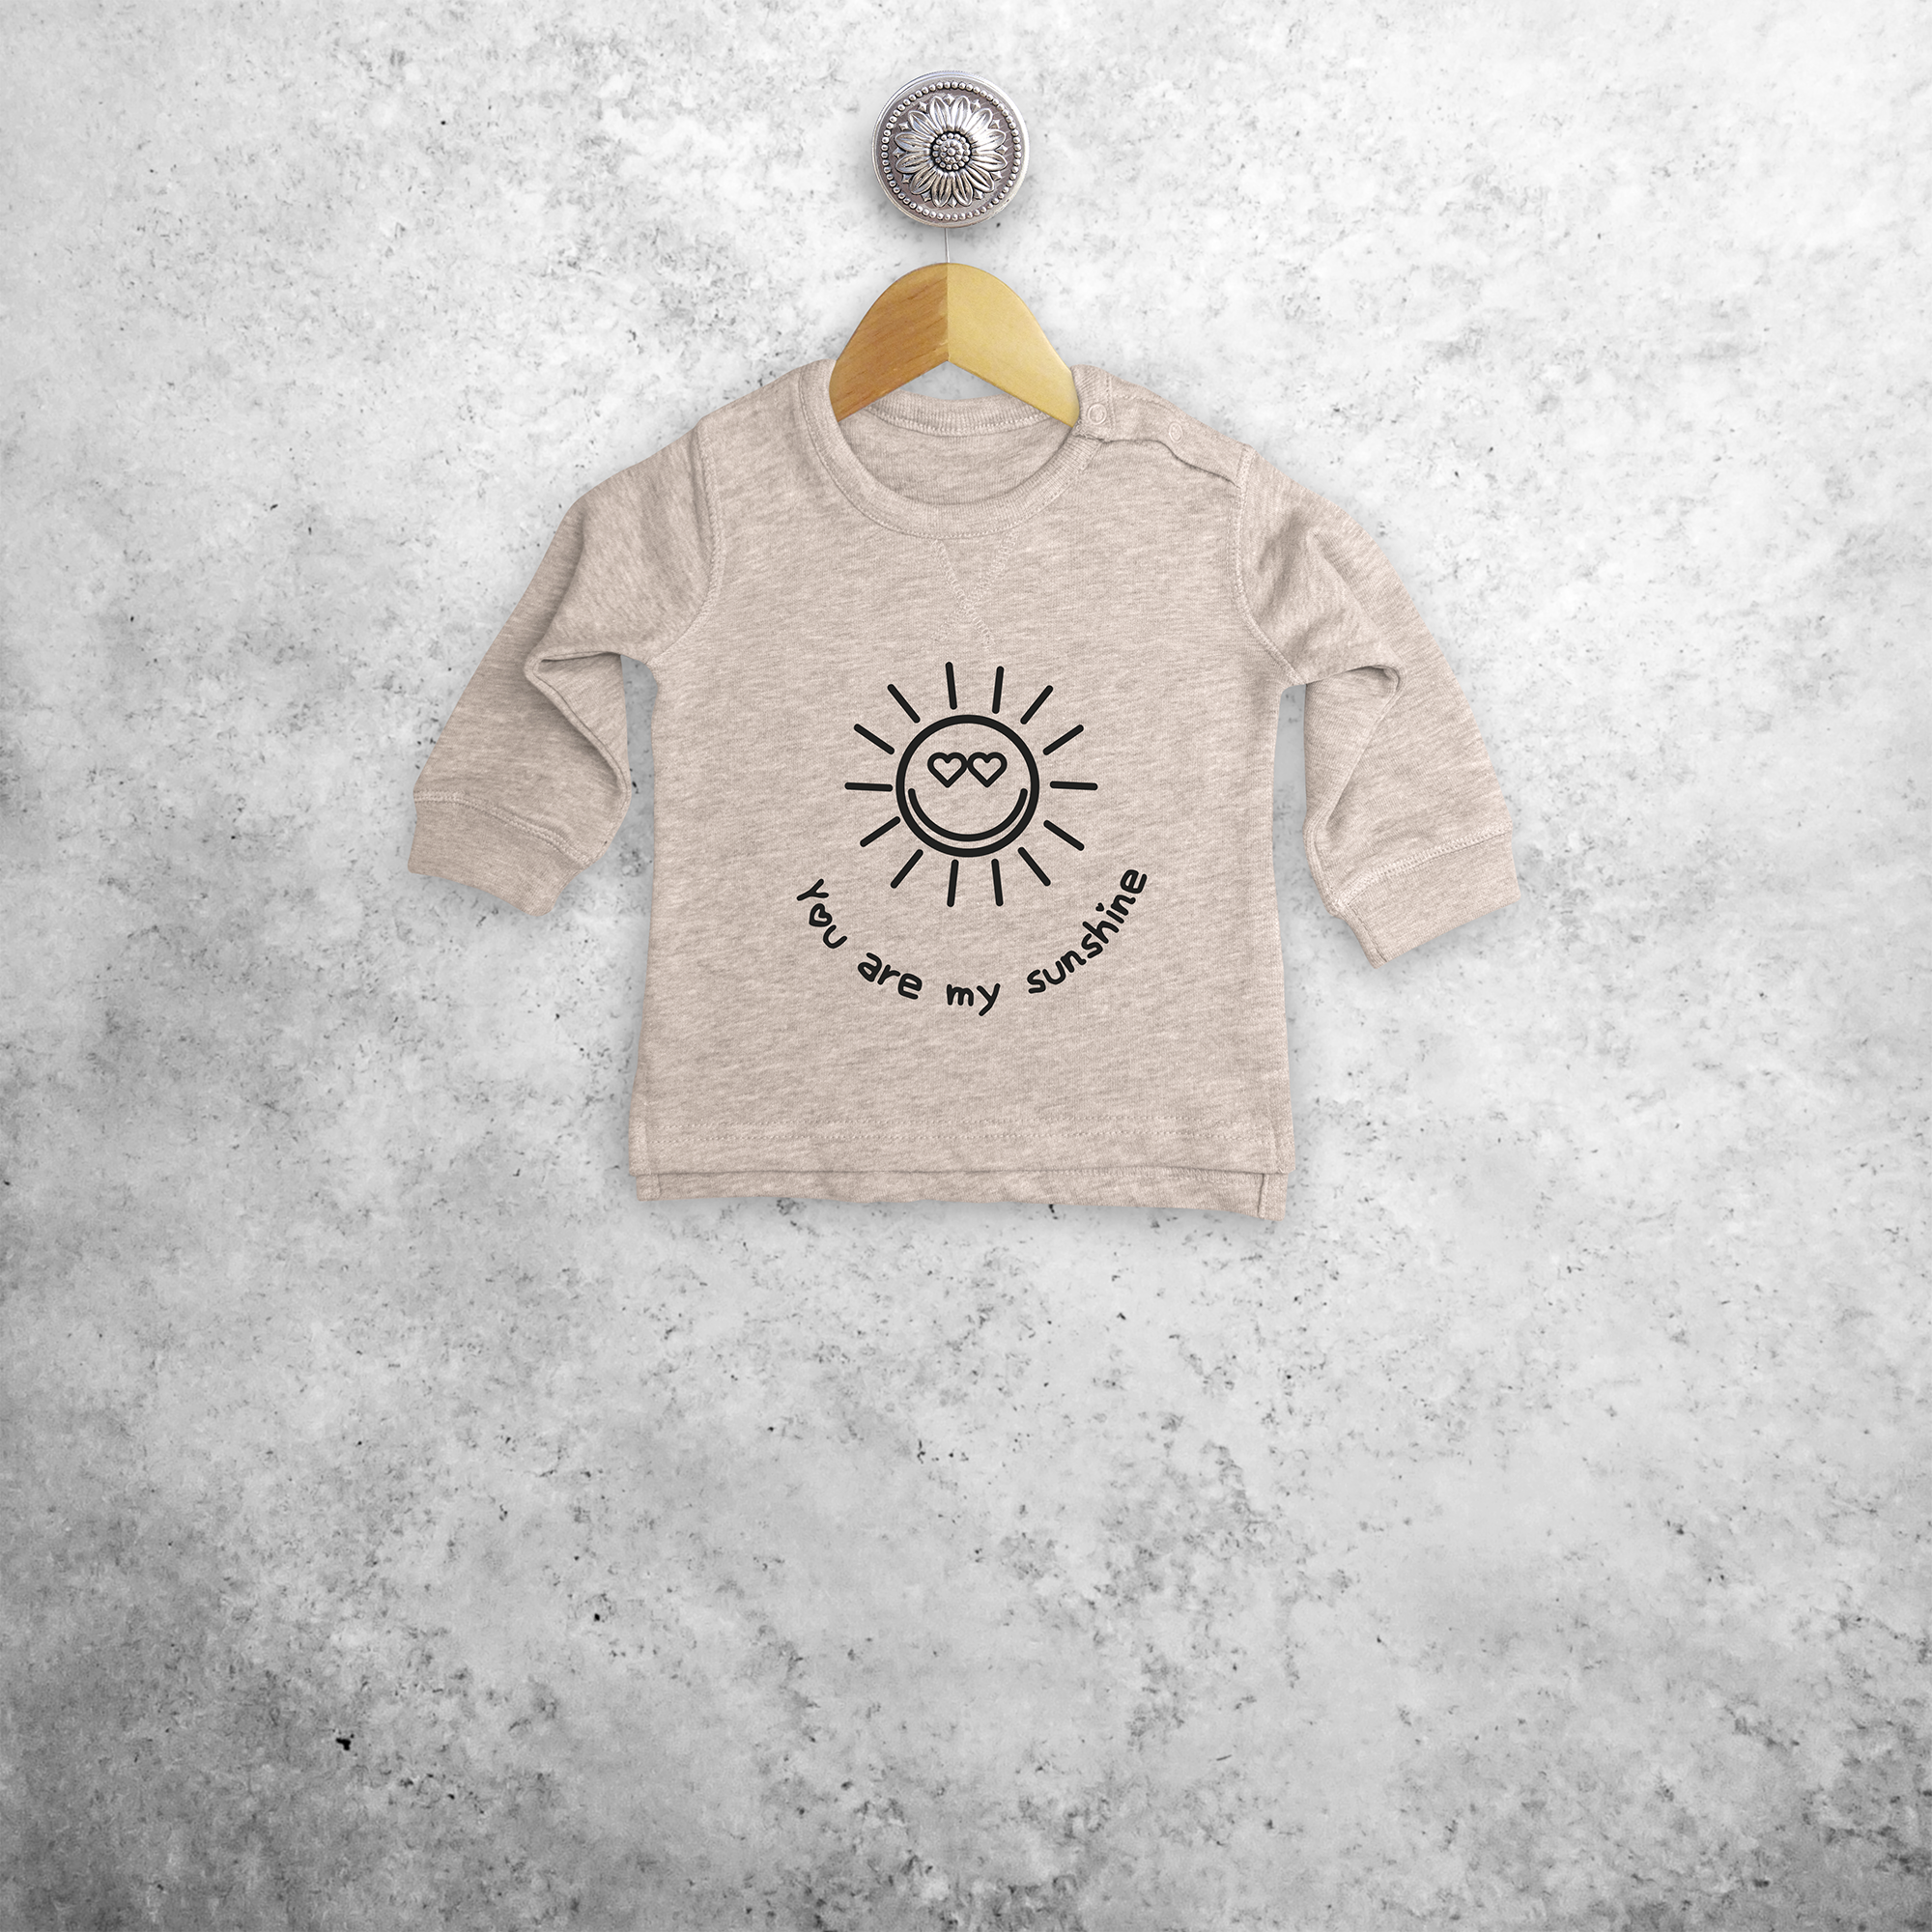 'You are my sunshine' baby sweater